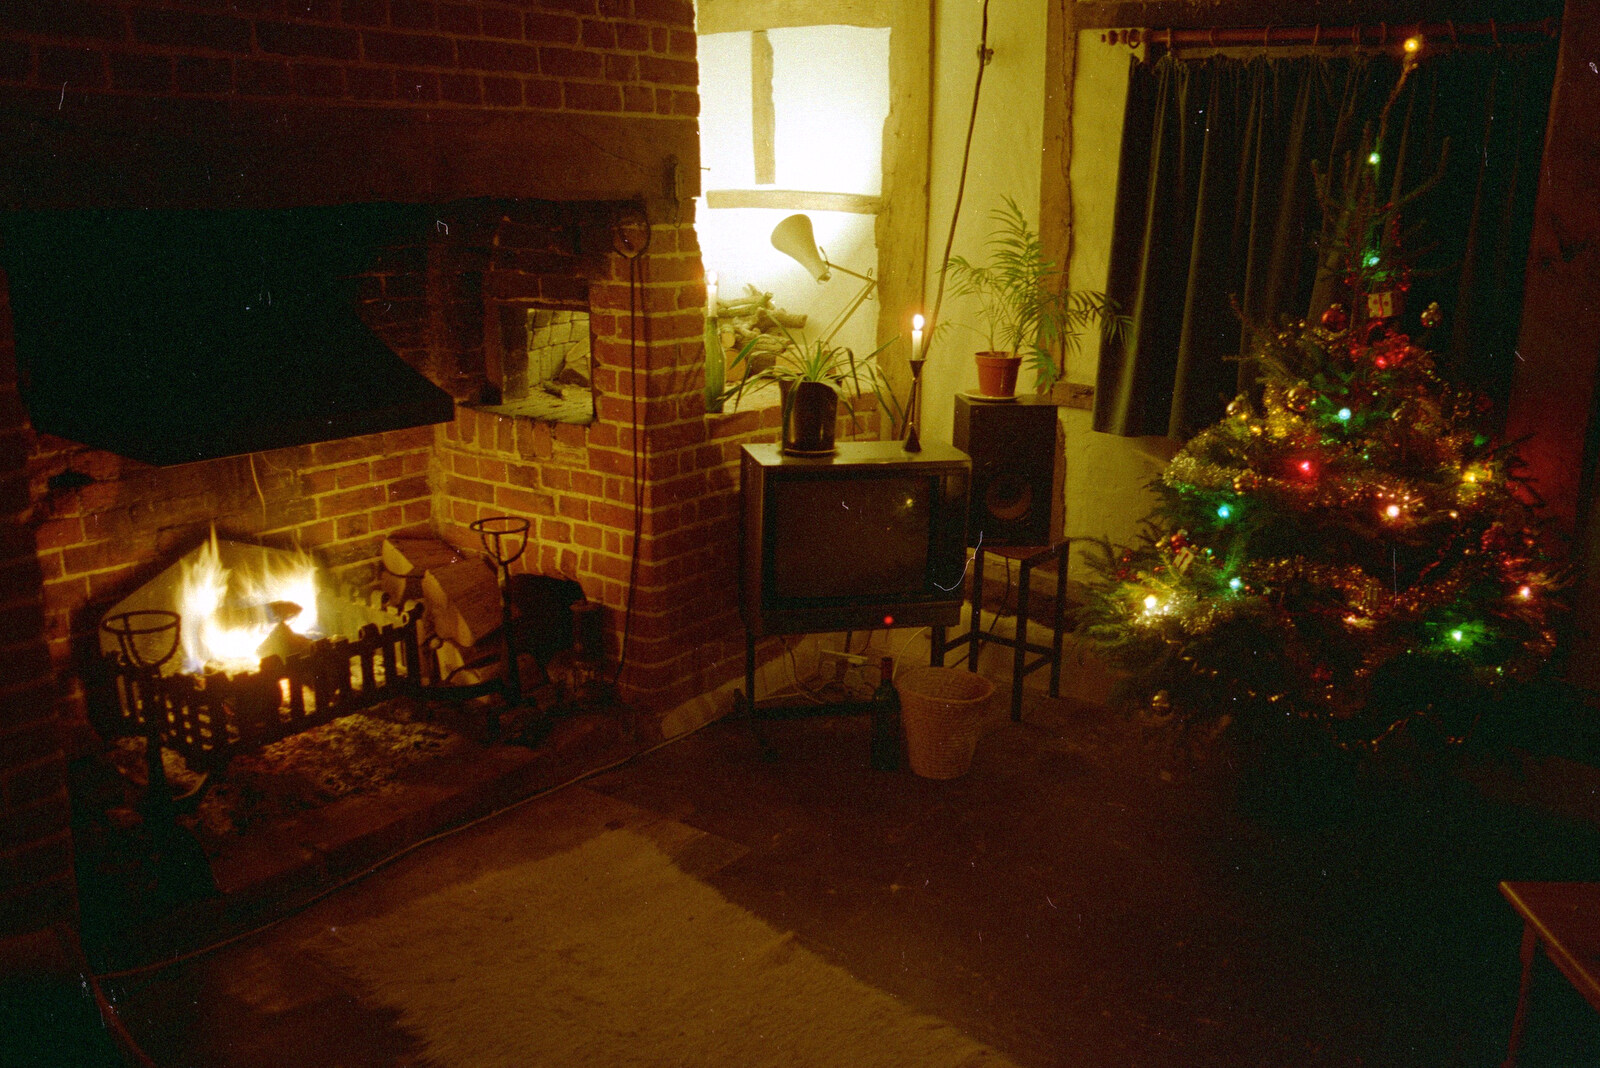 Nosher's Christmas lounge from New Year's Eve in the Swan Inn, Brome, Suffolk - 31st December 1995